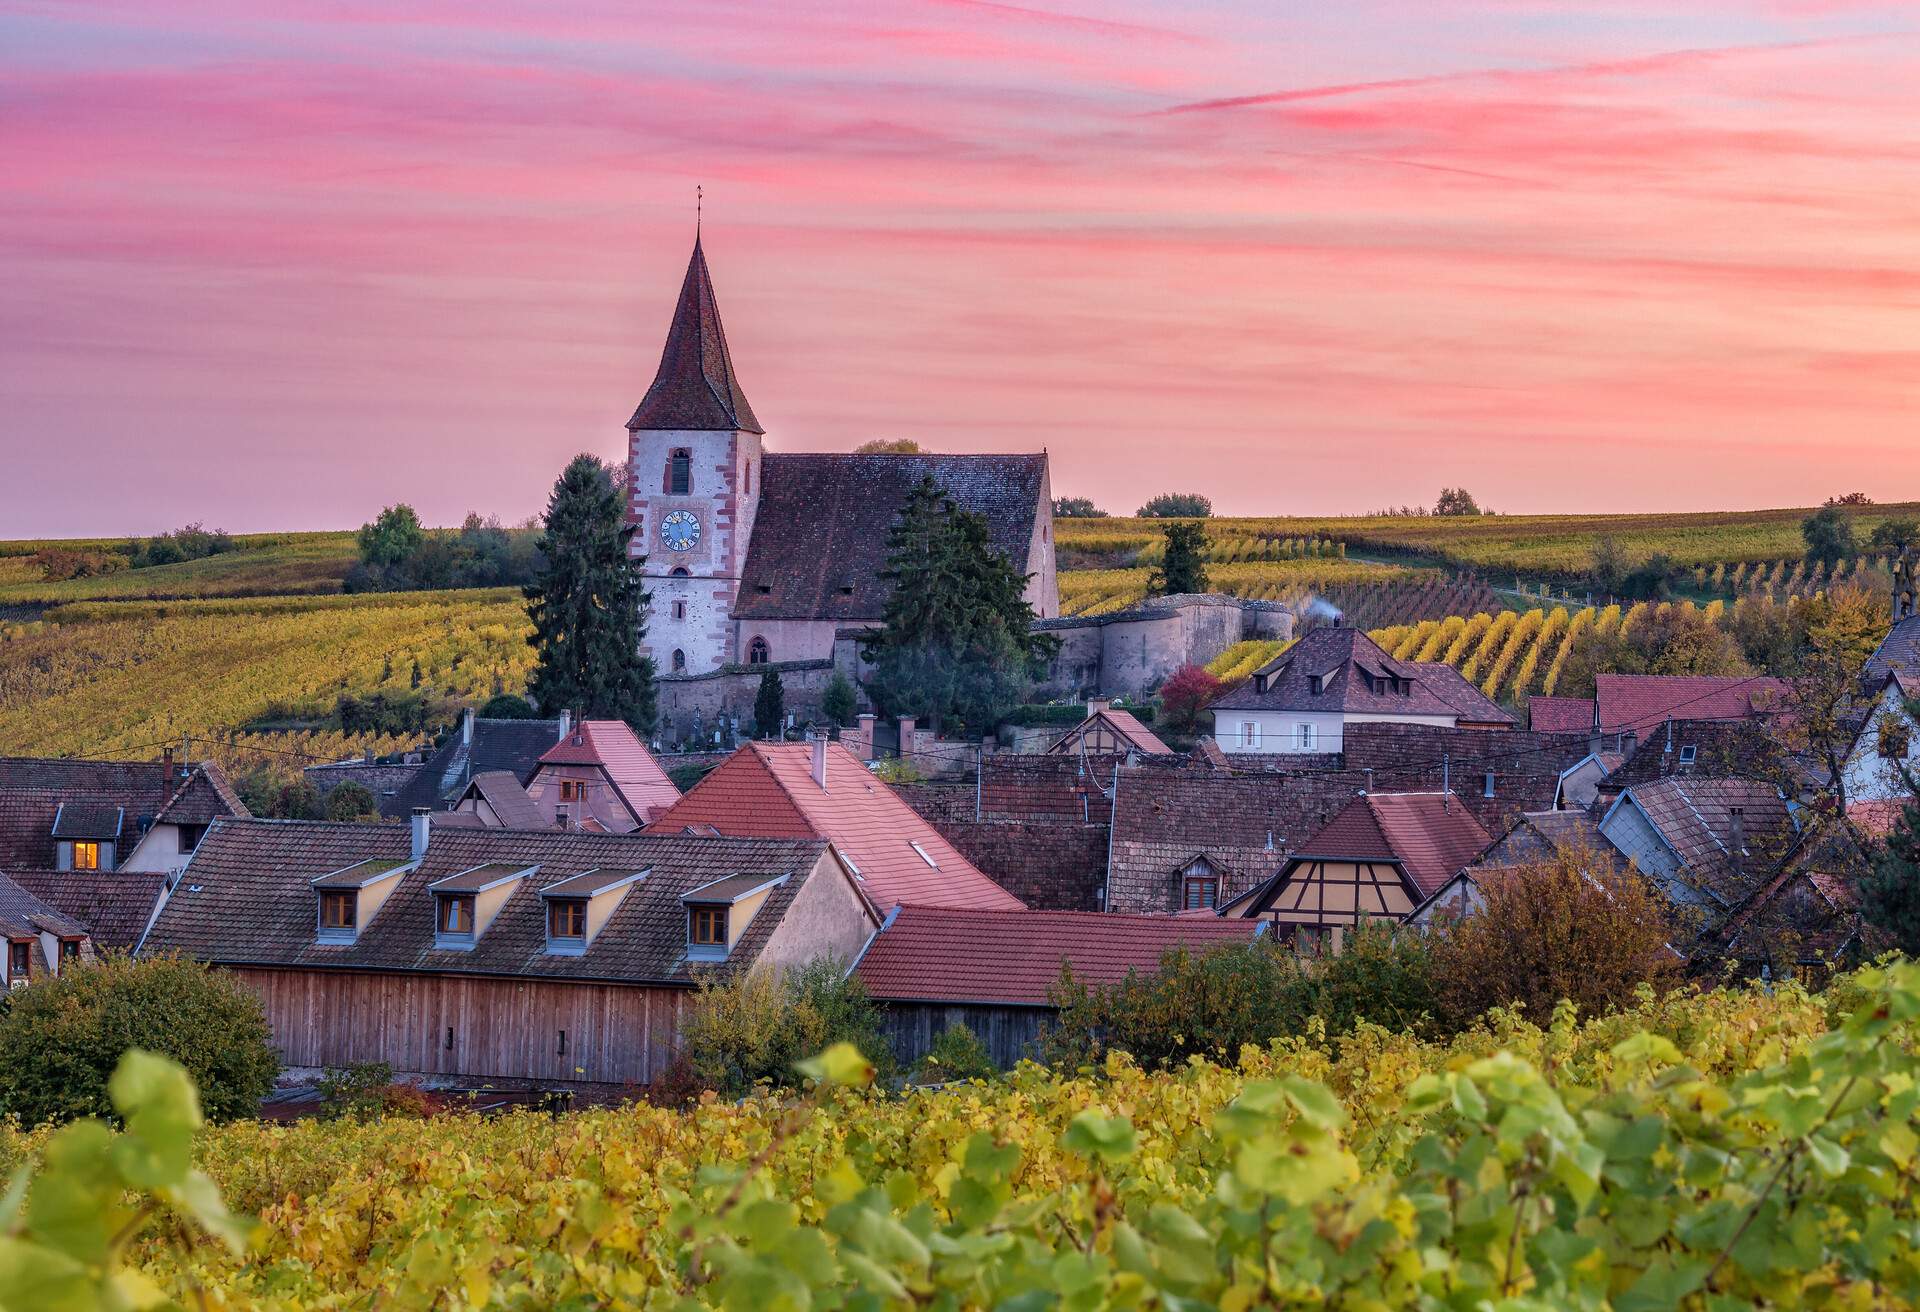 Scenic autumn landscape with a historic castle in Alsace, France, and vineyards growing on hills against sunset sky. Colorful travel and wine-making background.